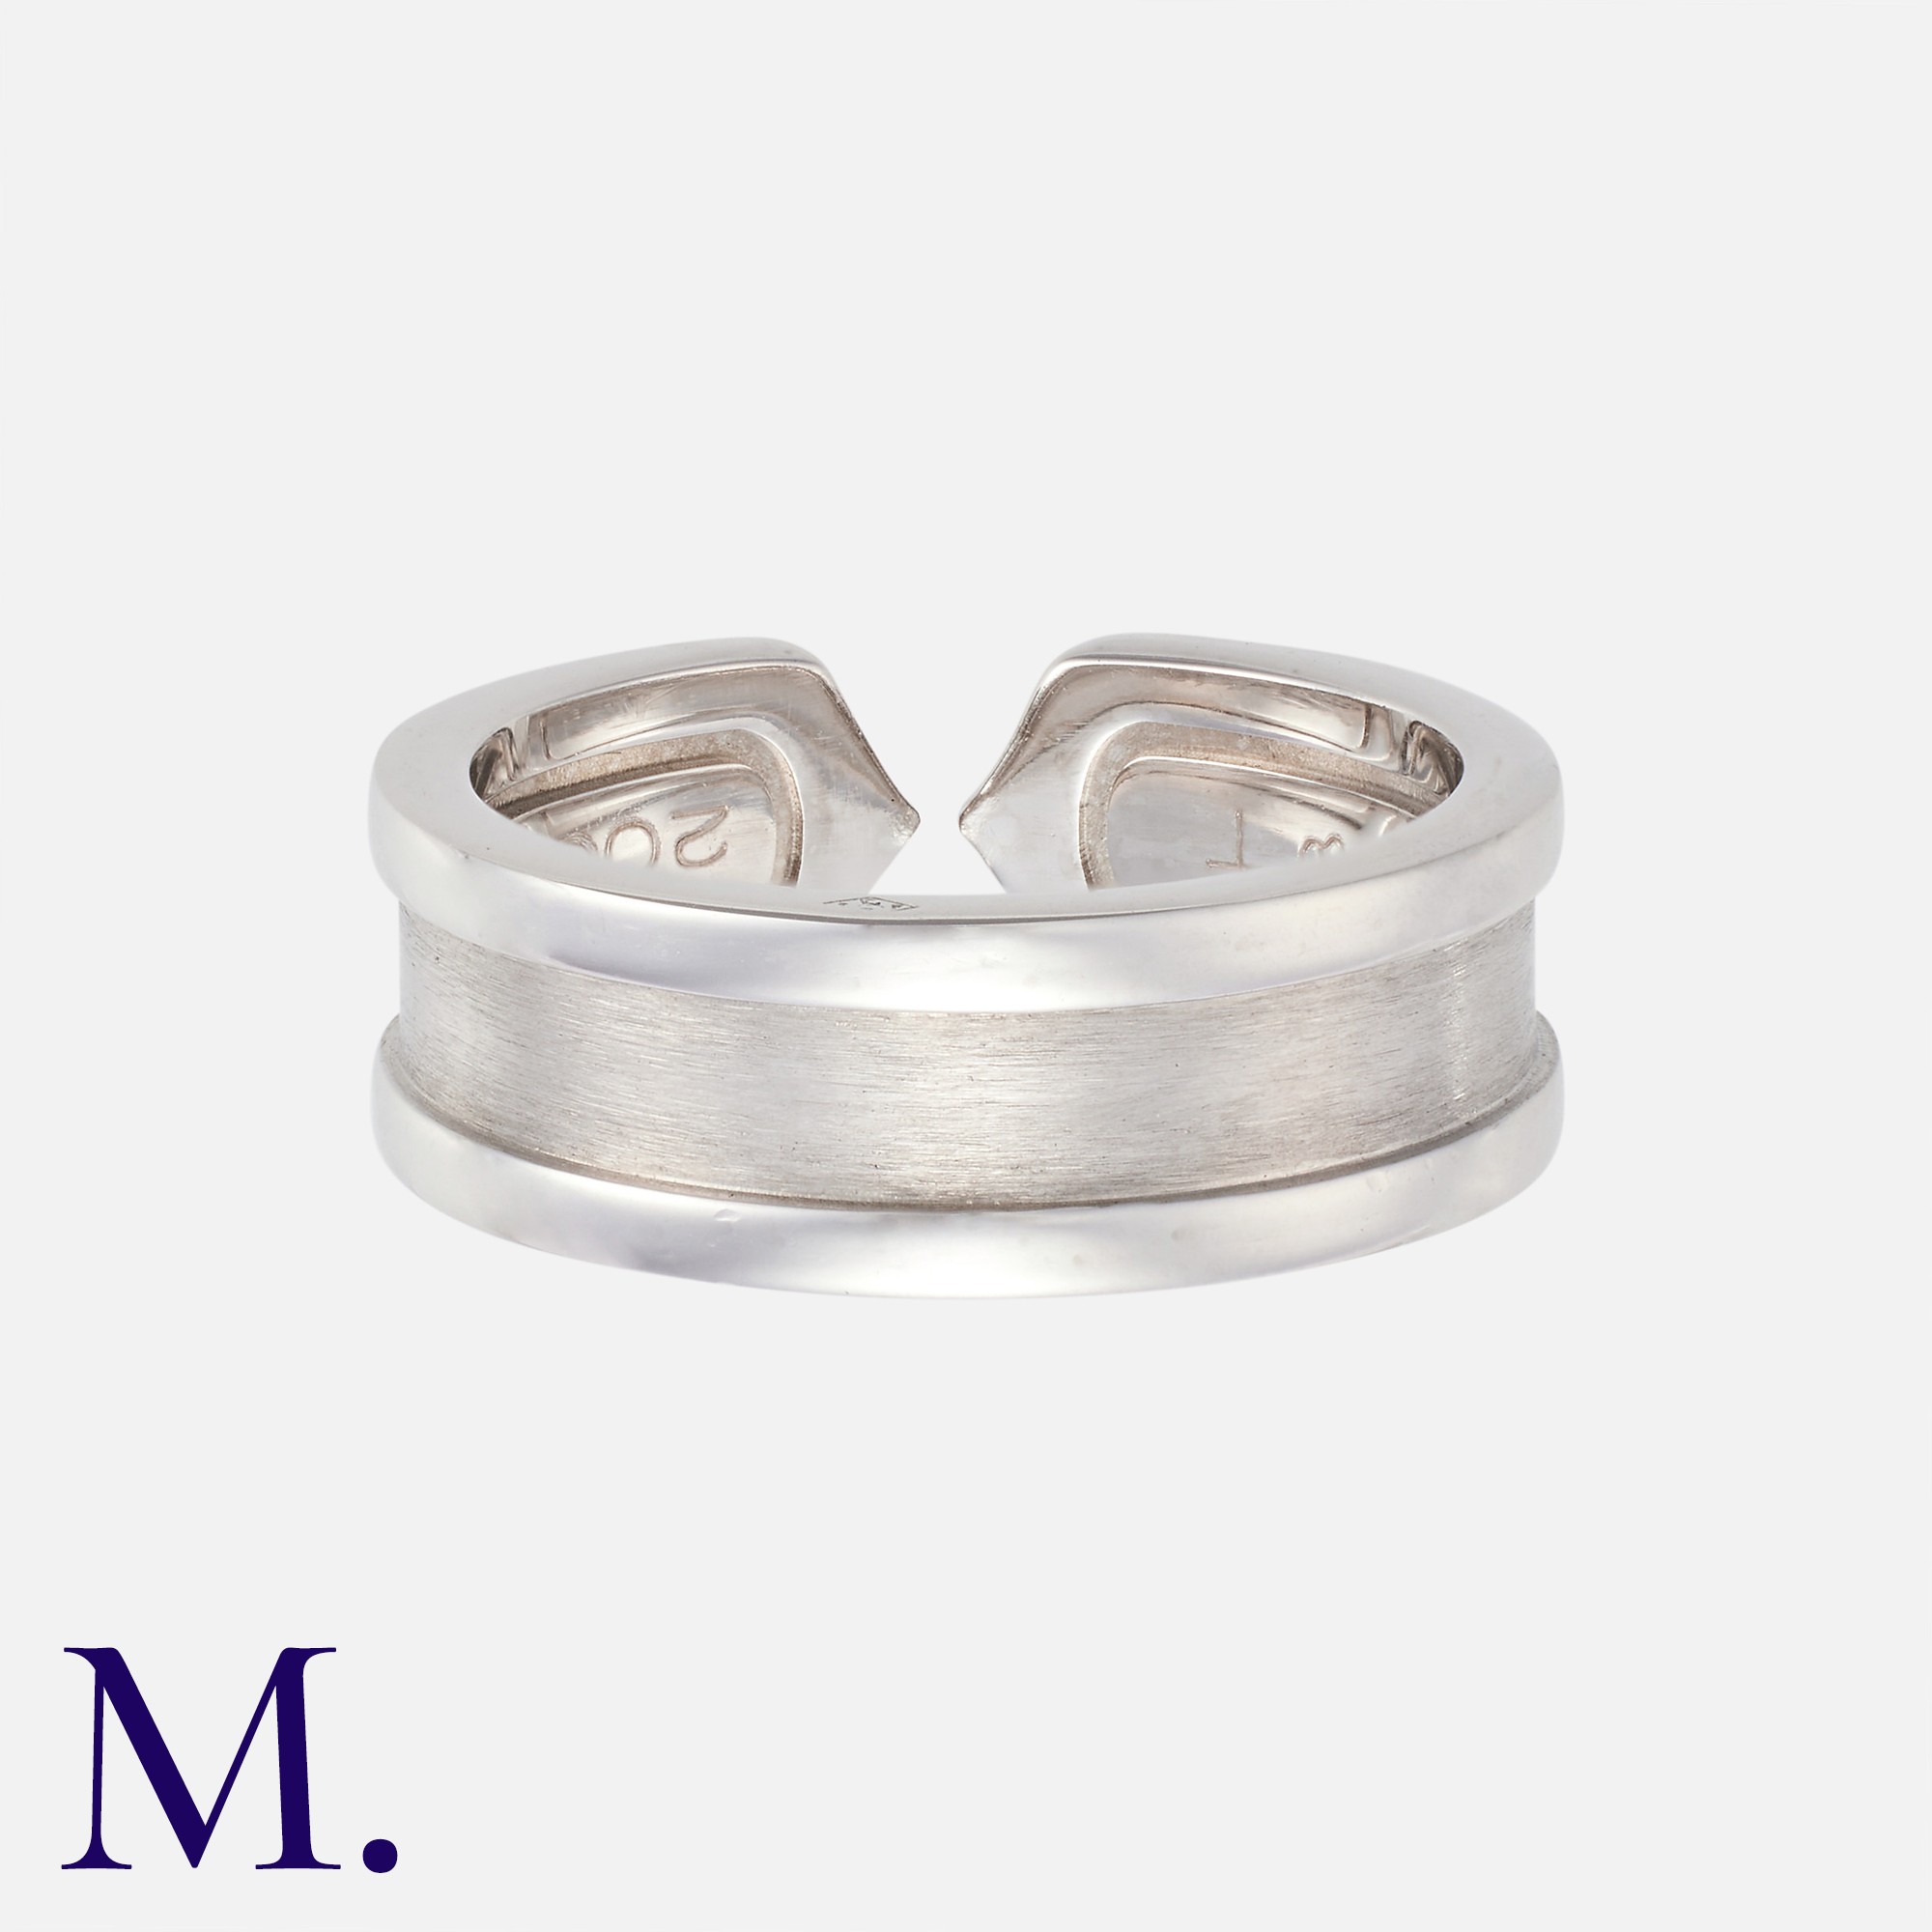 CARTIER. A 'C de Cartier' Ring in 18K white gold. Signed Cartier and marked for 18ct gold. With - Image 2 of 2